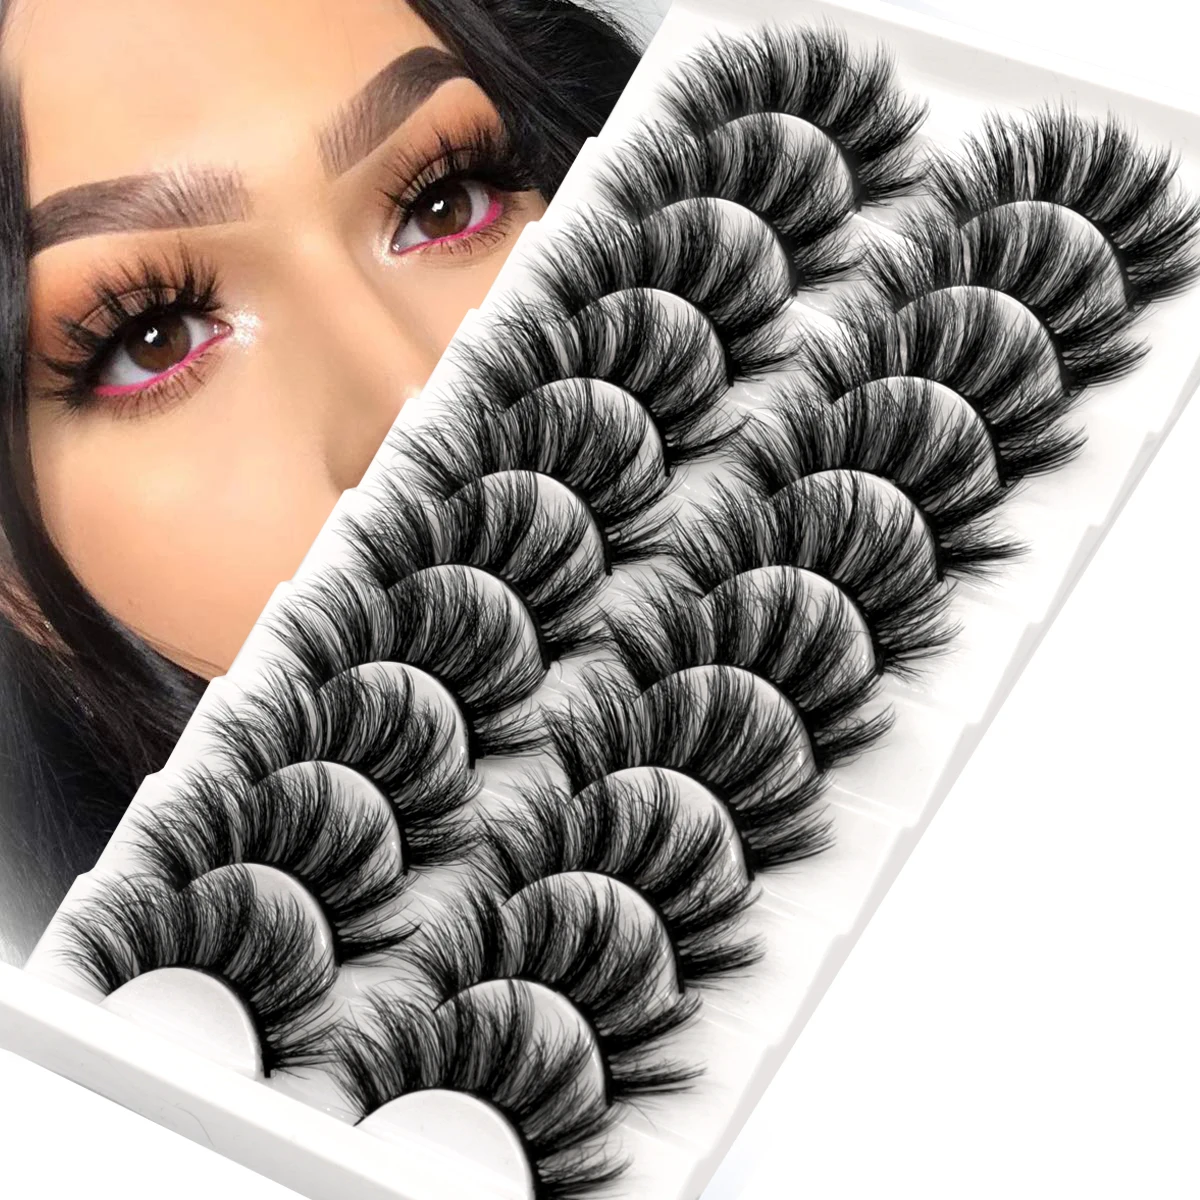 GROINNEYA Lashes 5/10 Pairs 3D Faux Mink Lashes Fluffy Soft Wispy Volume Natural long False Eyelashes Reusable Eyelashs Makeup 3 4pairs makeup eyelashes 3d mink lashes thick handmade fluffy lashes cruelty free volume wispy soft lash reusable false eyelash